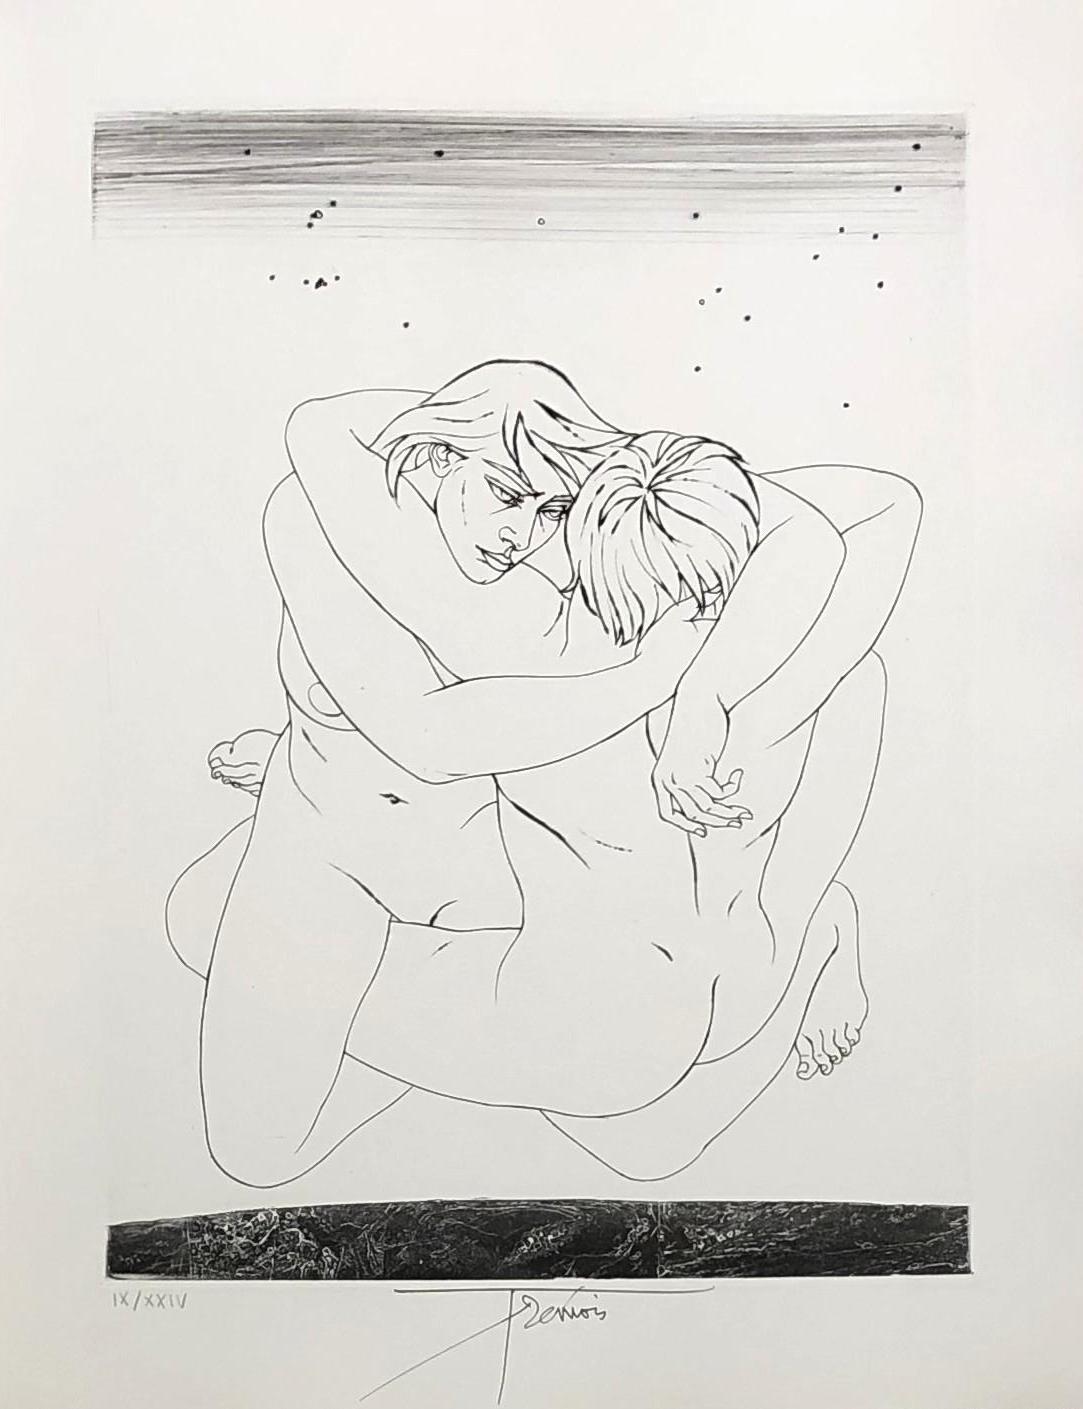 Pierre-Yves Trémois Figurative Print - Couple Embraced - Original etching handsigned and numbered